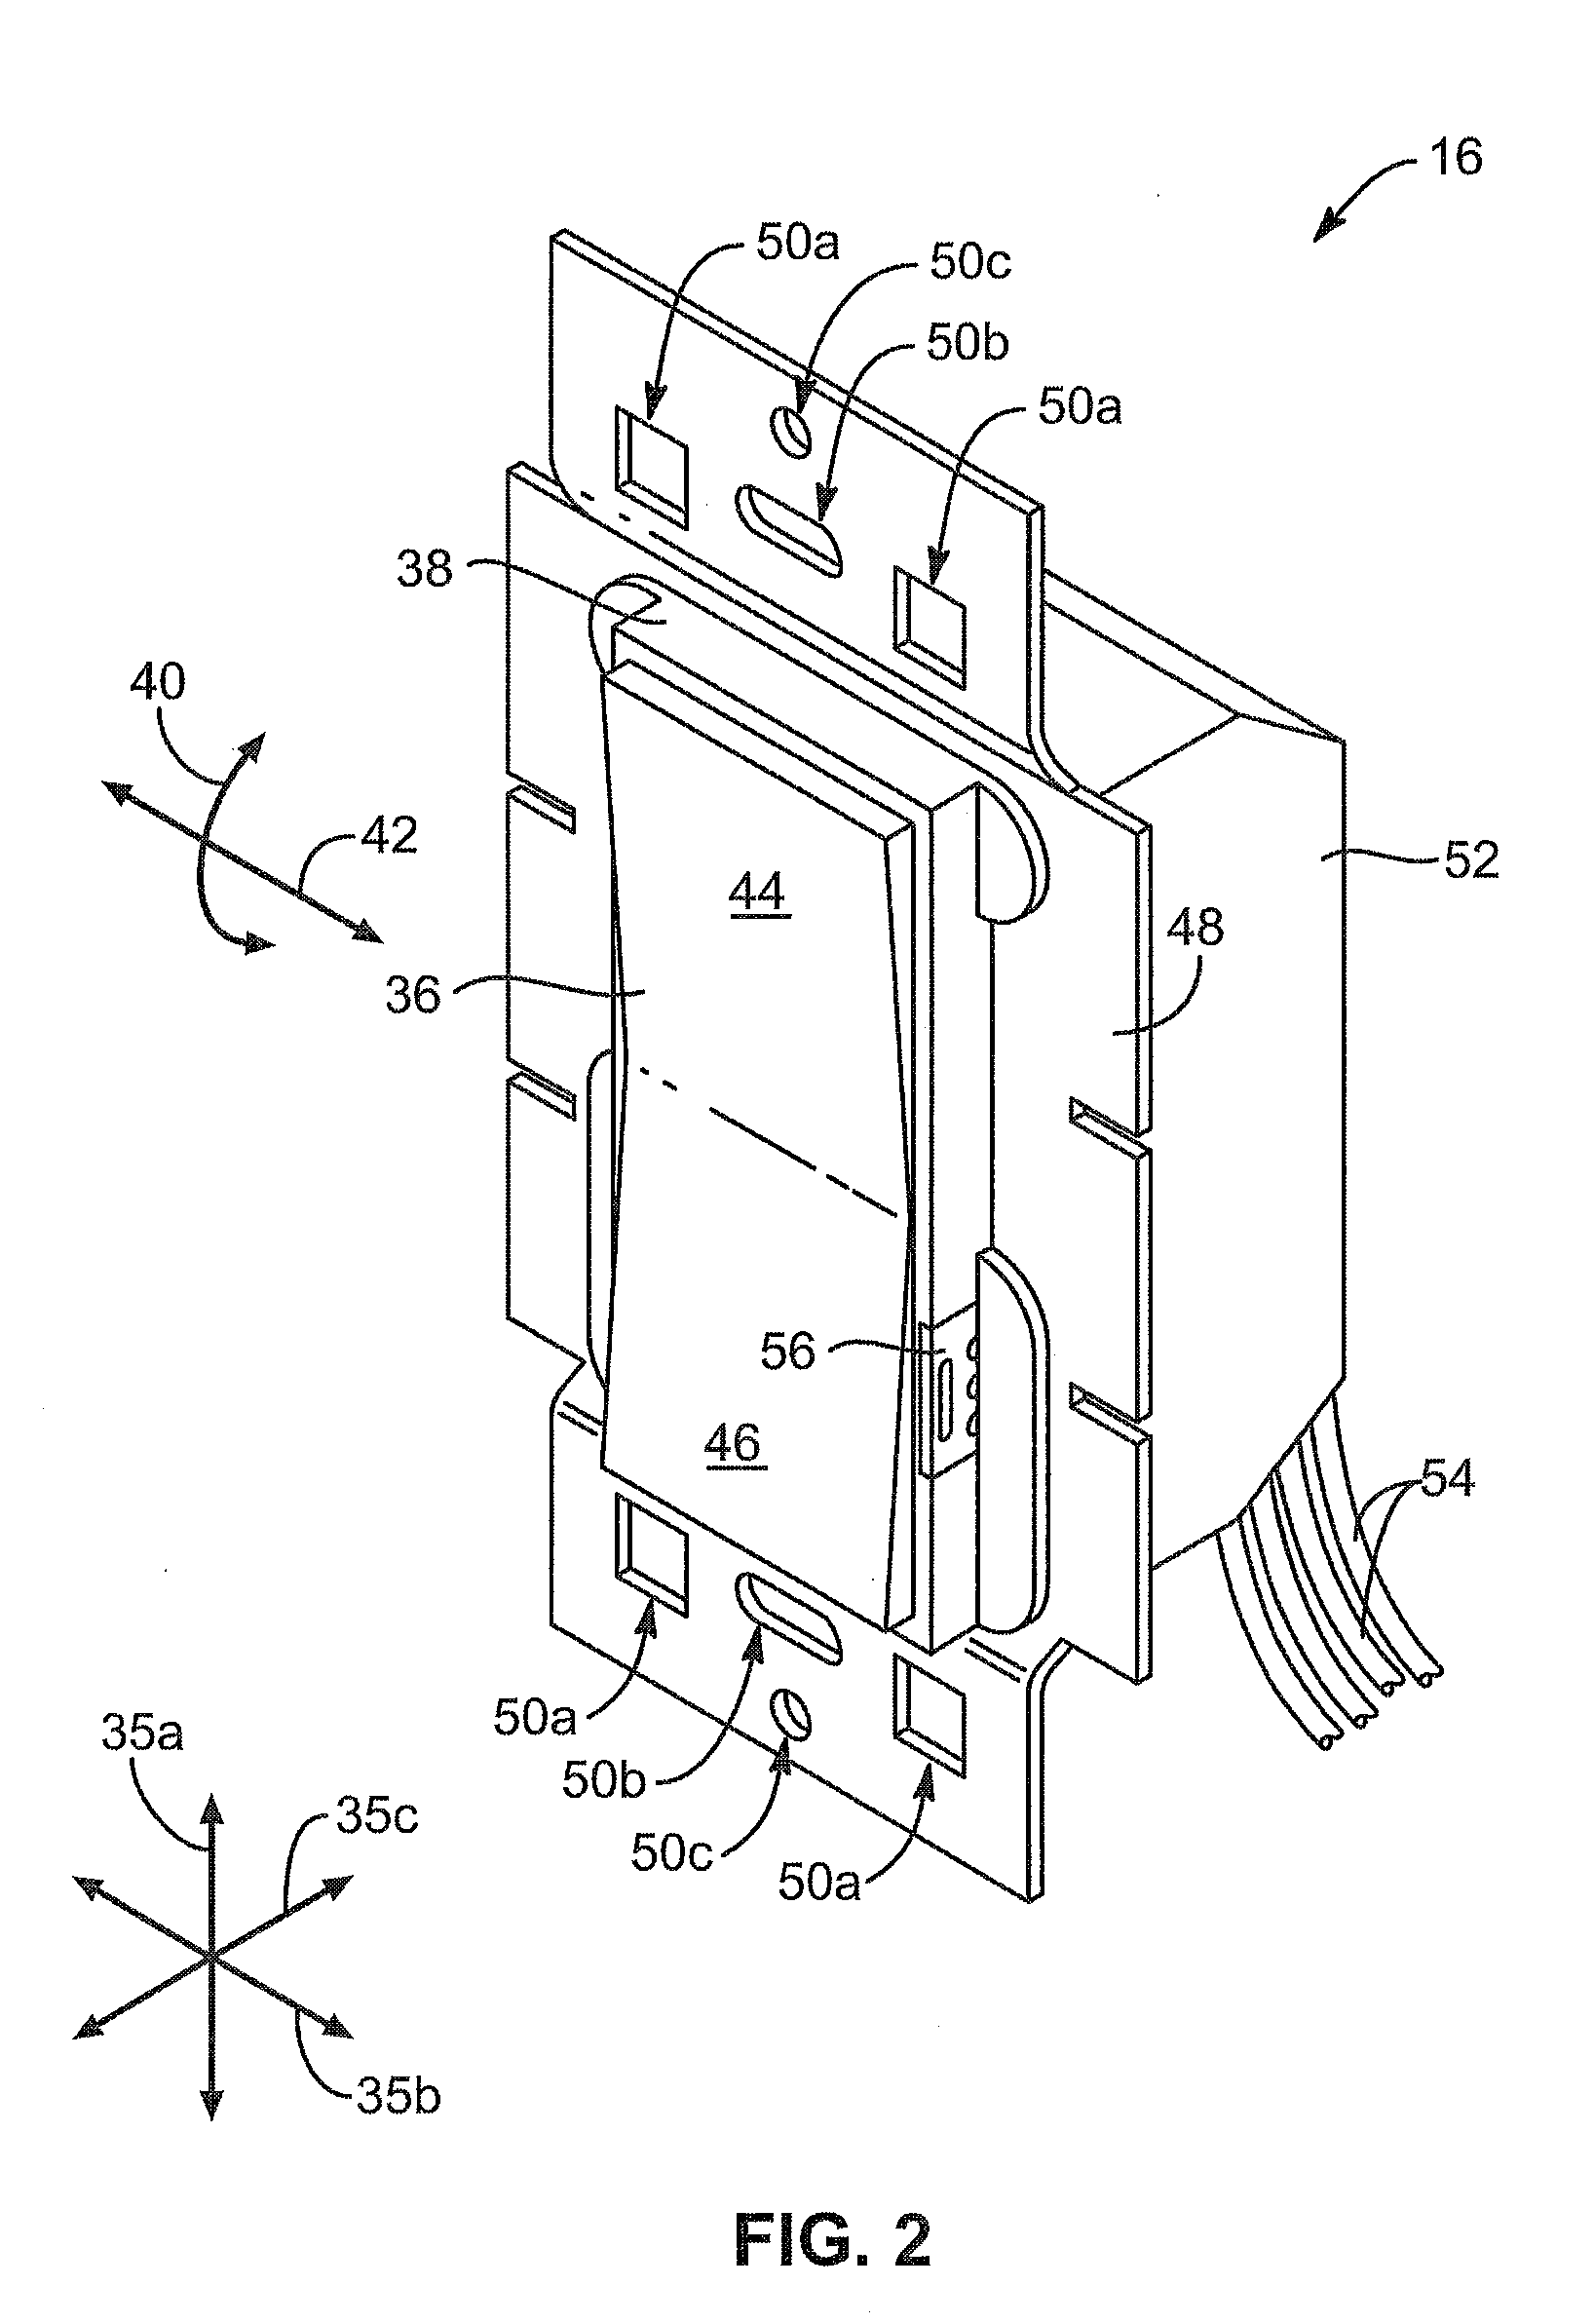 Designer-style dimmer apparatus and method